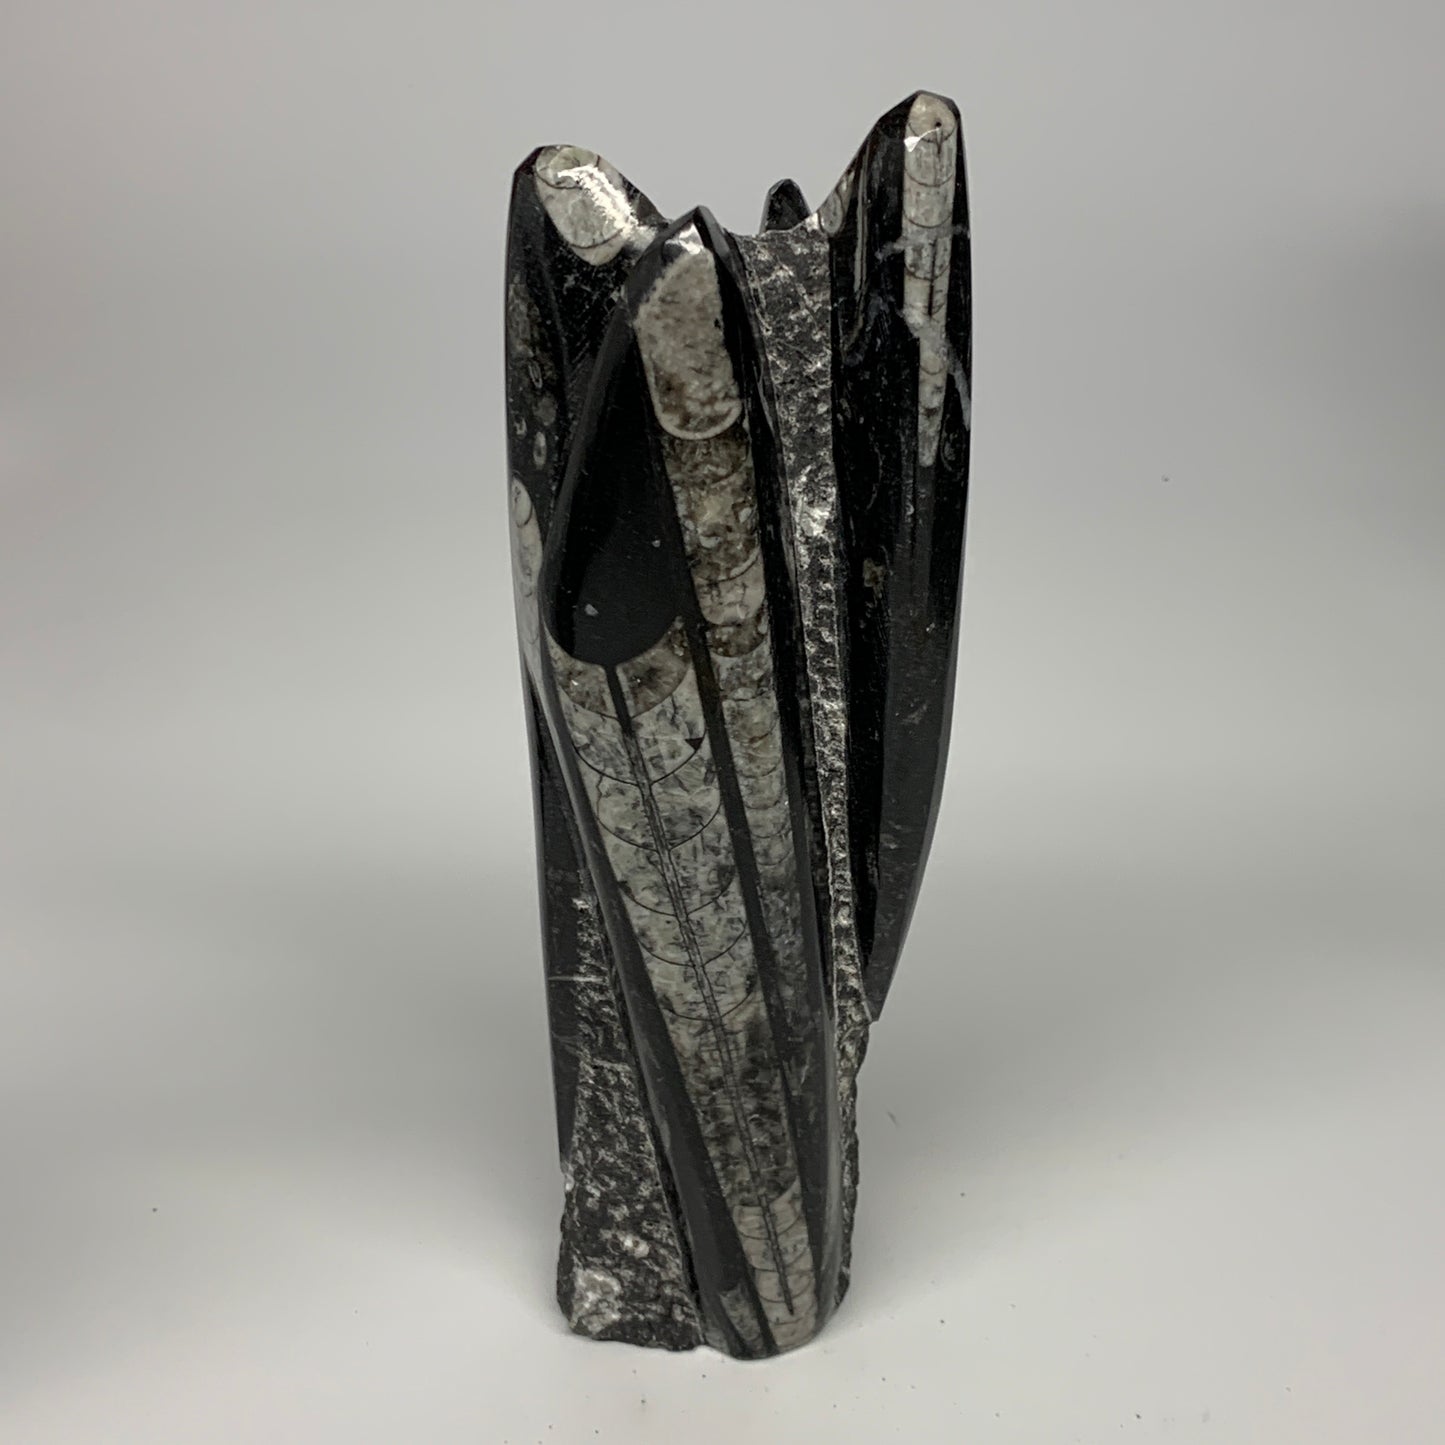 1295g, 8.75"x2.8"x2.2" Black Fossils Orthoceras Sculpture Tower @Morocco, B23424